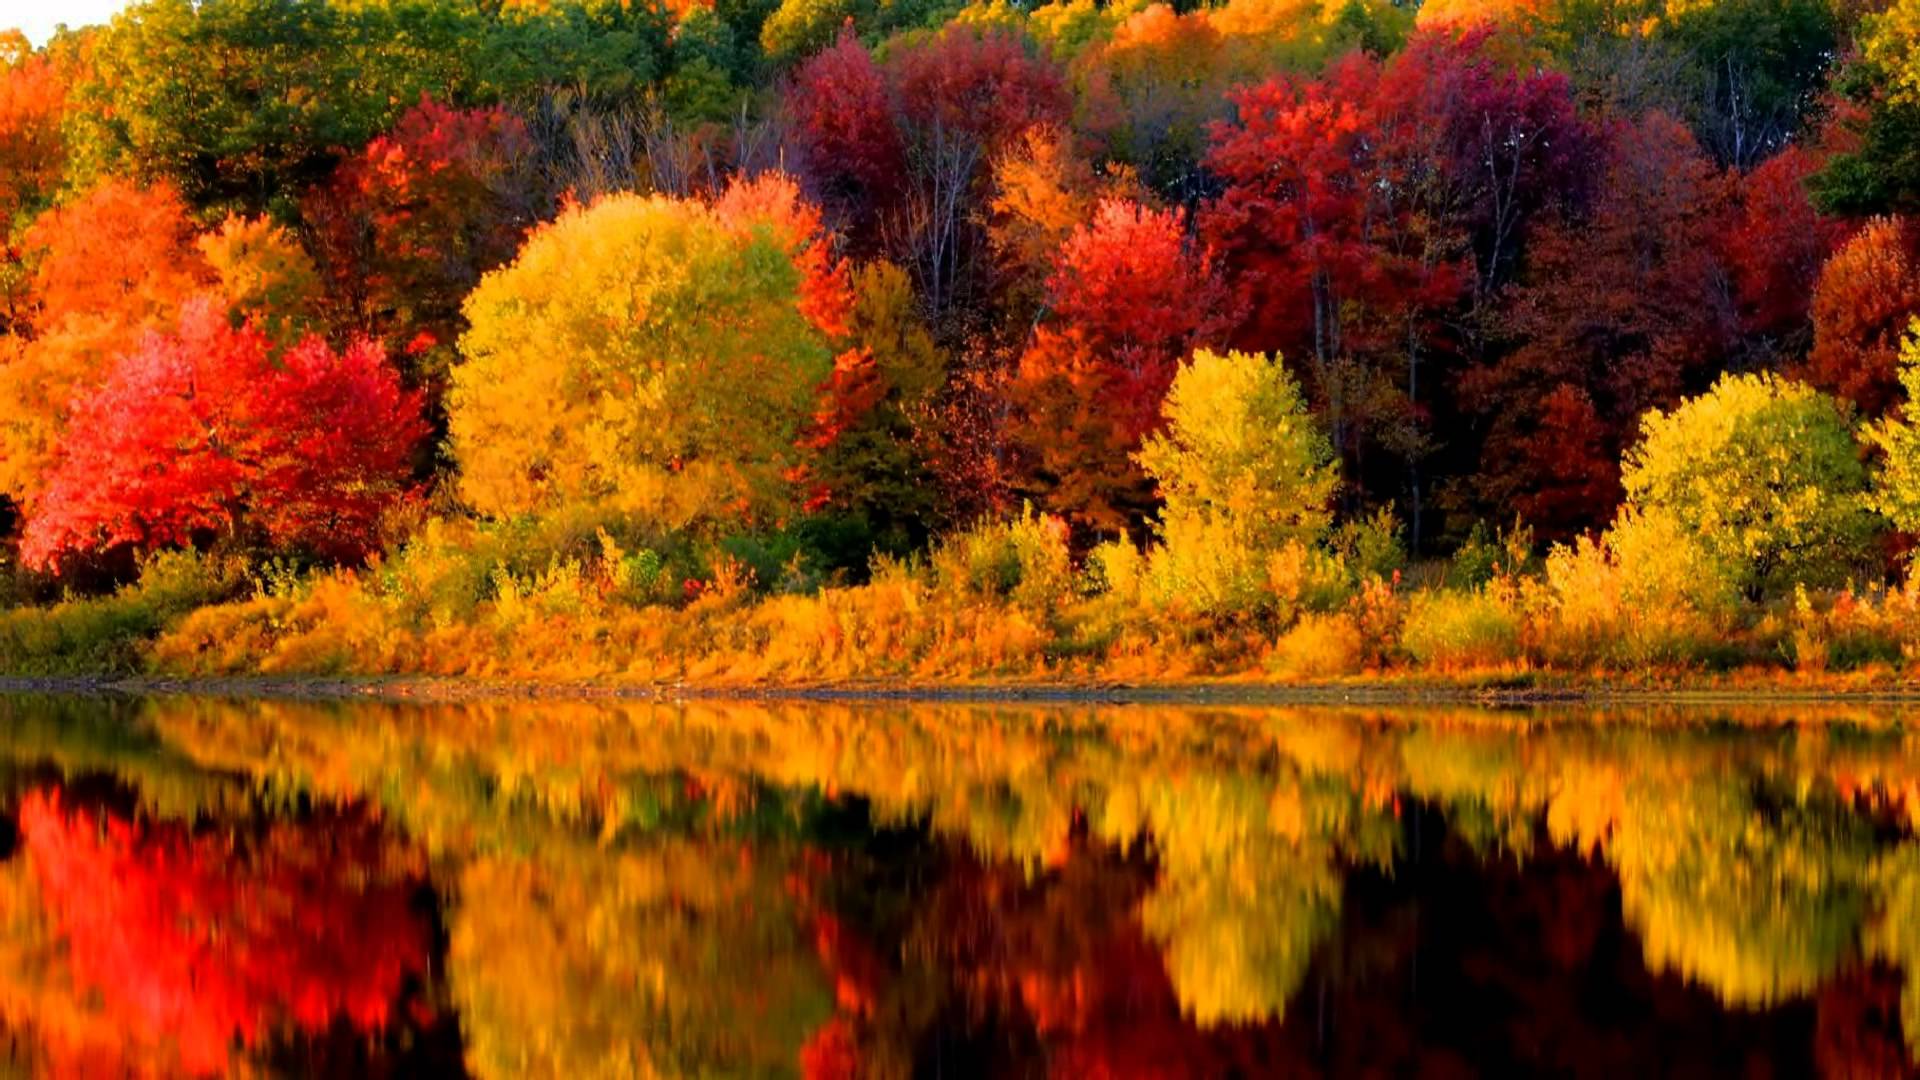 Autumn in New England Music by Vivaldi